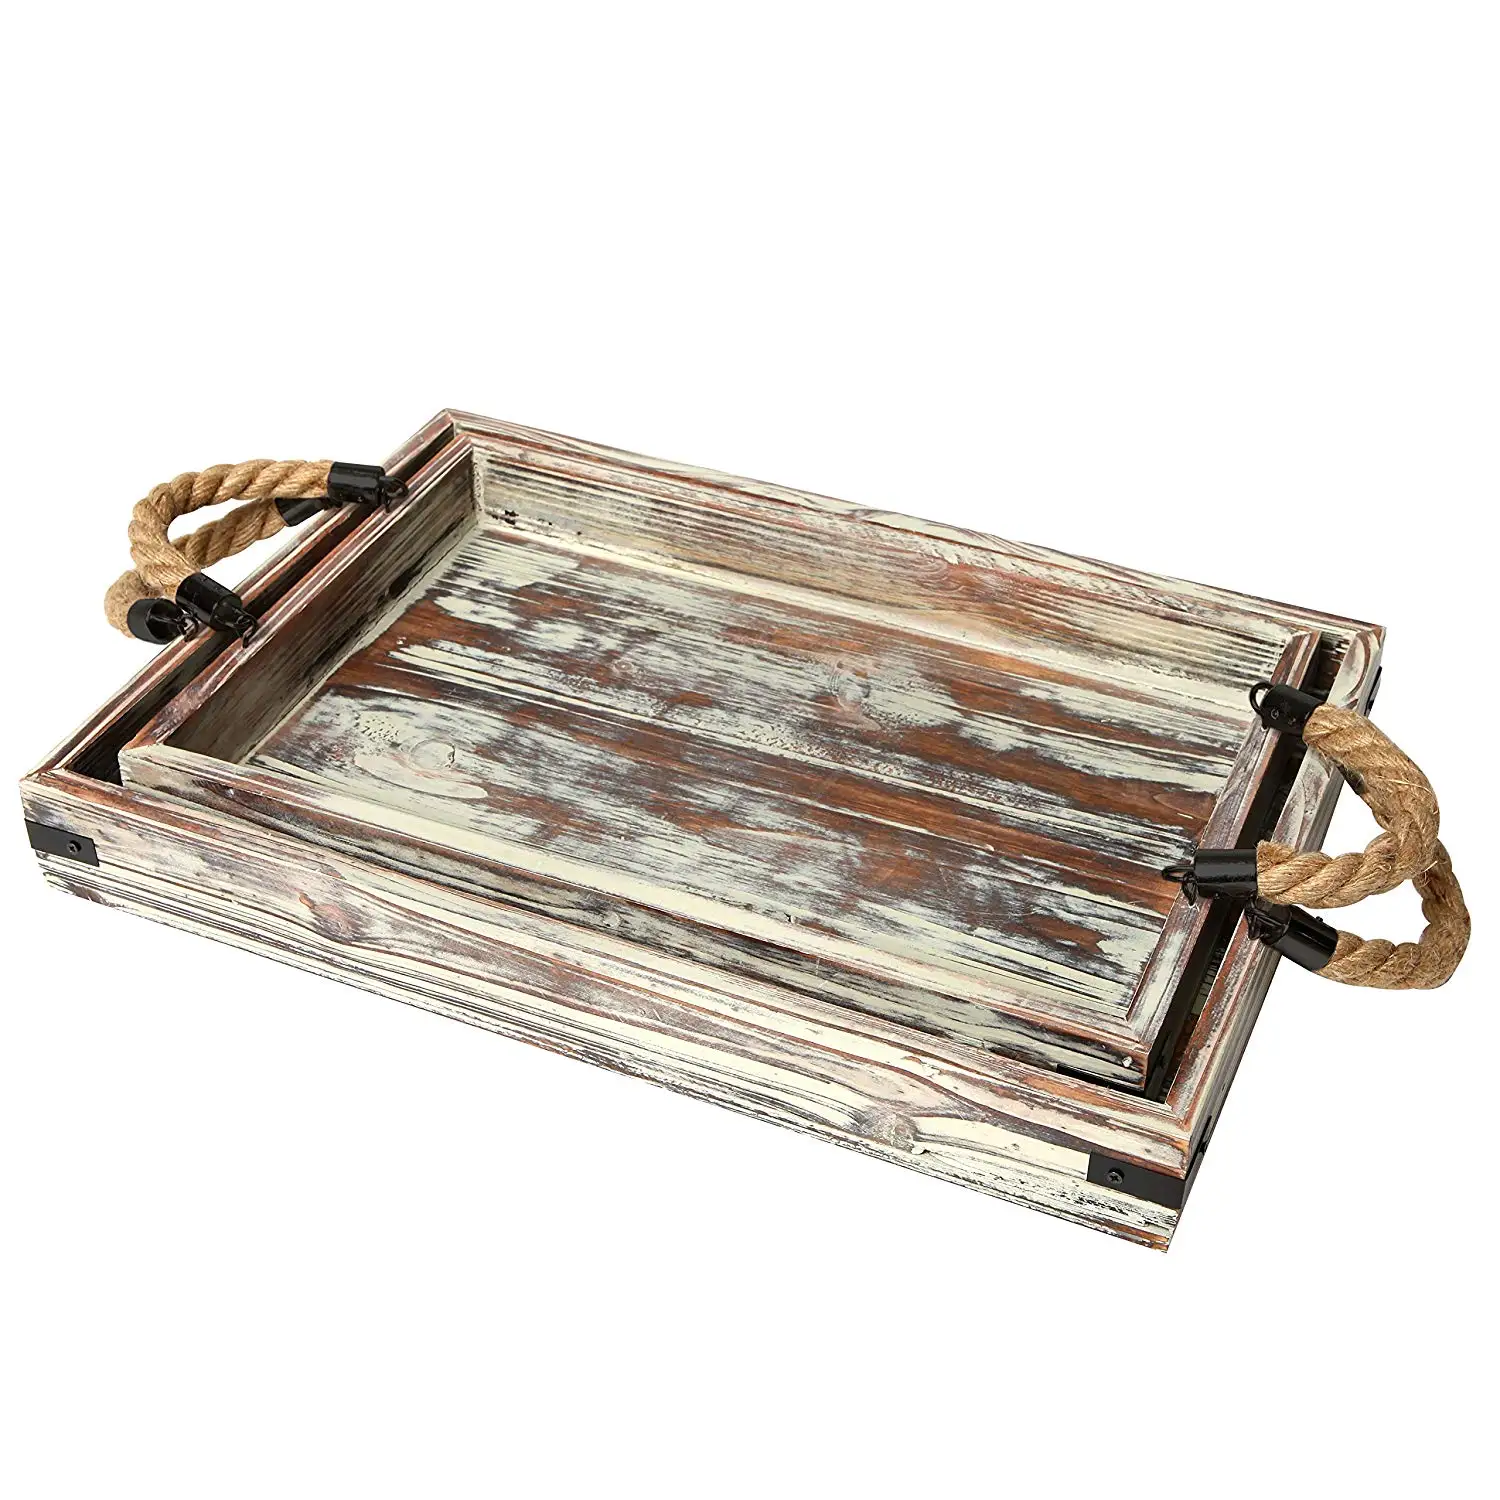 Country Rustic Wood Coffee Tray Set Of 2 With Rope Handles 